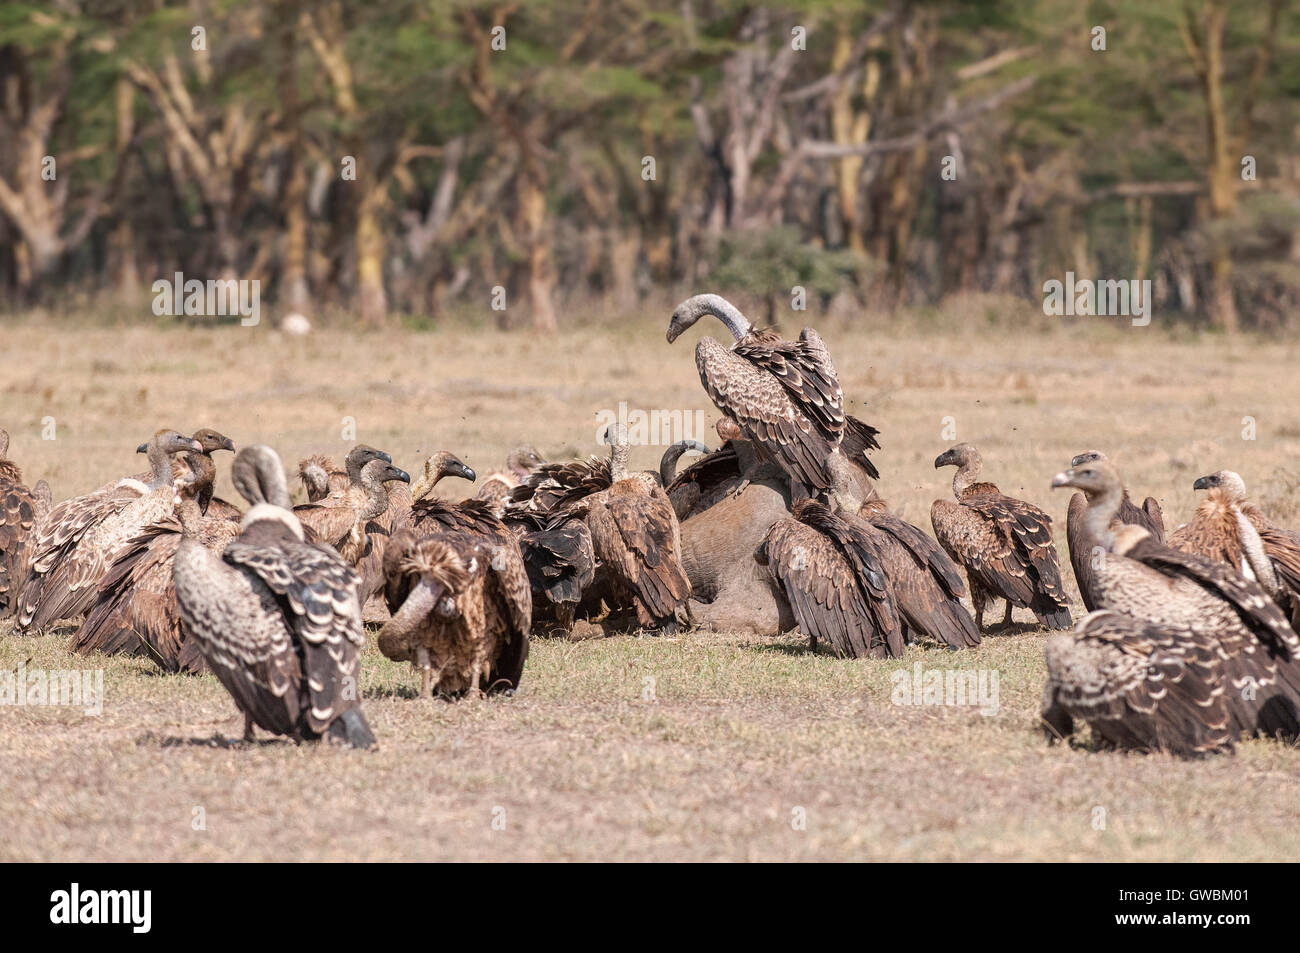 Vultures eating a kill. Stock Photo